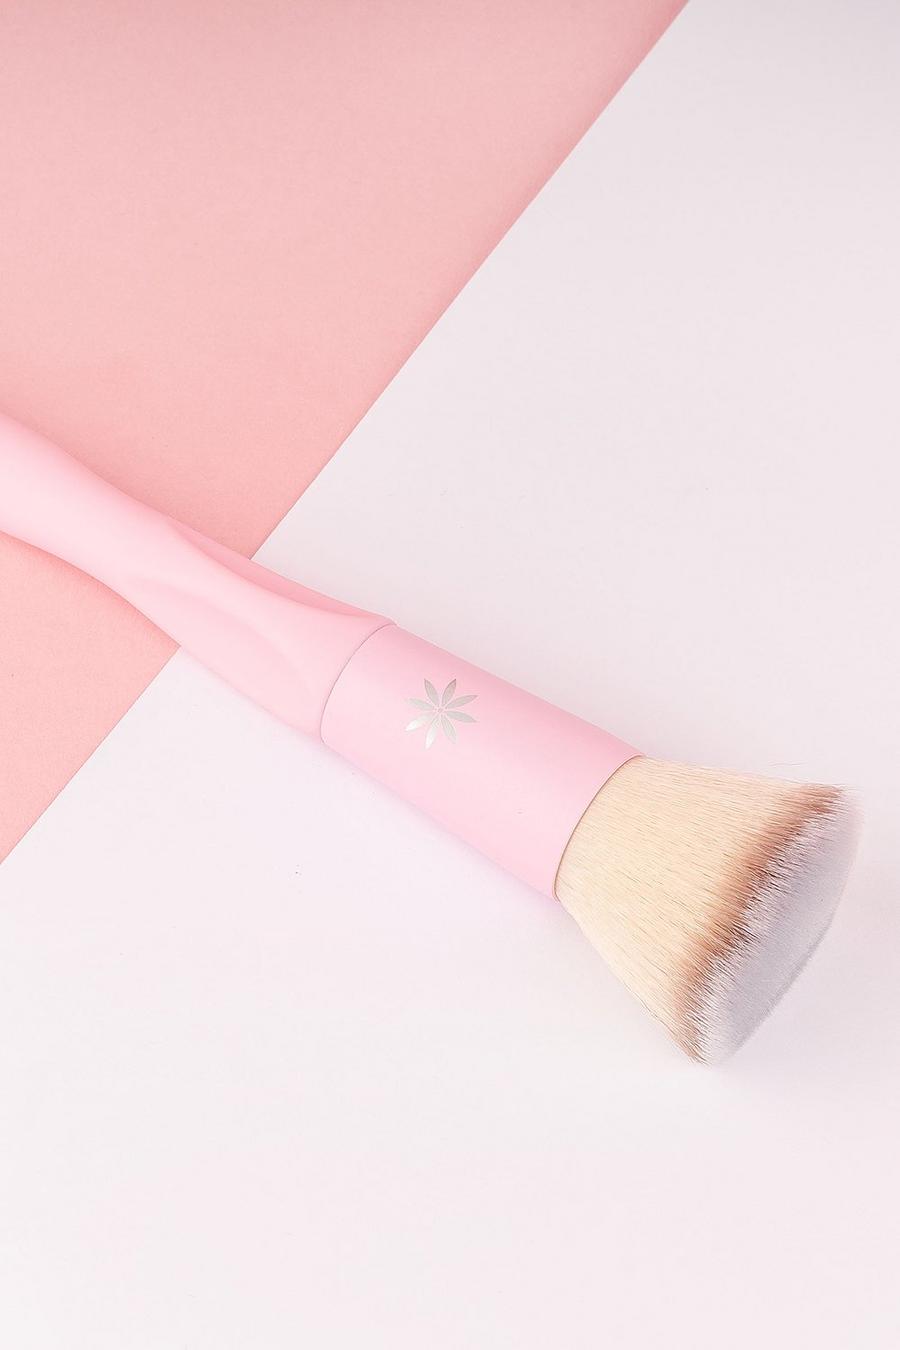 Brushworks HD Foundation-Pinsel, Baby pink